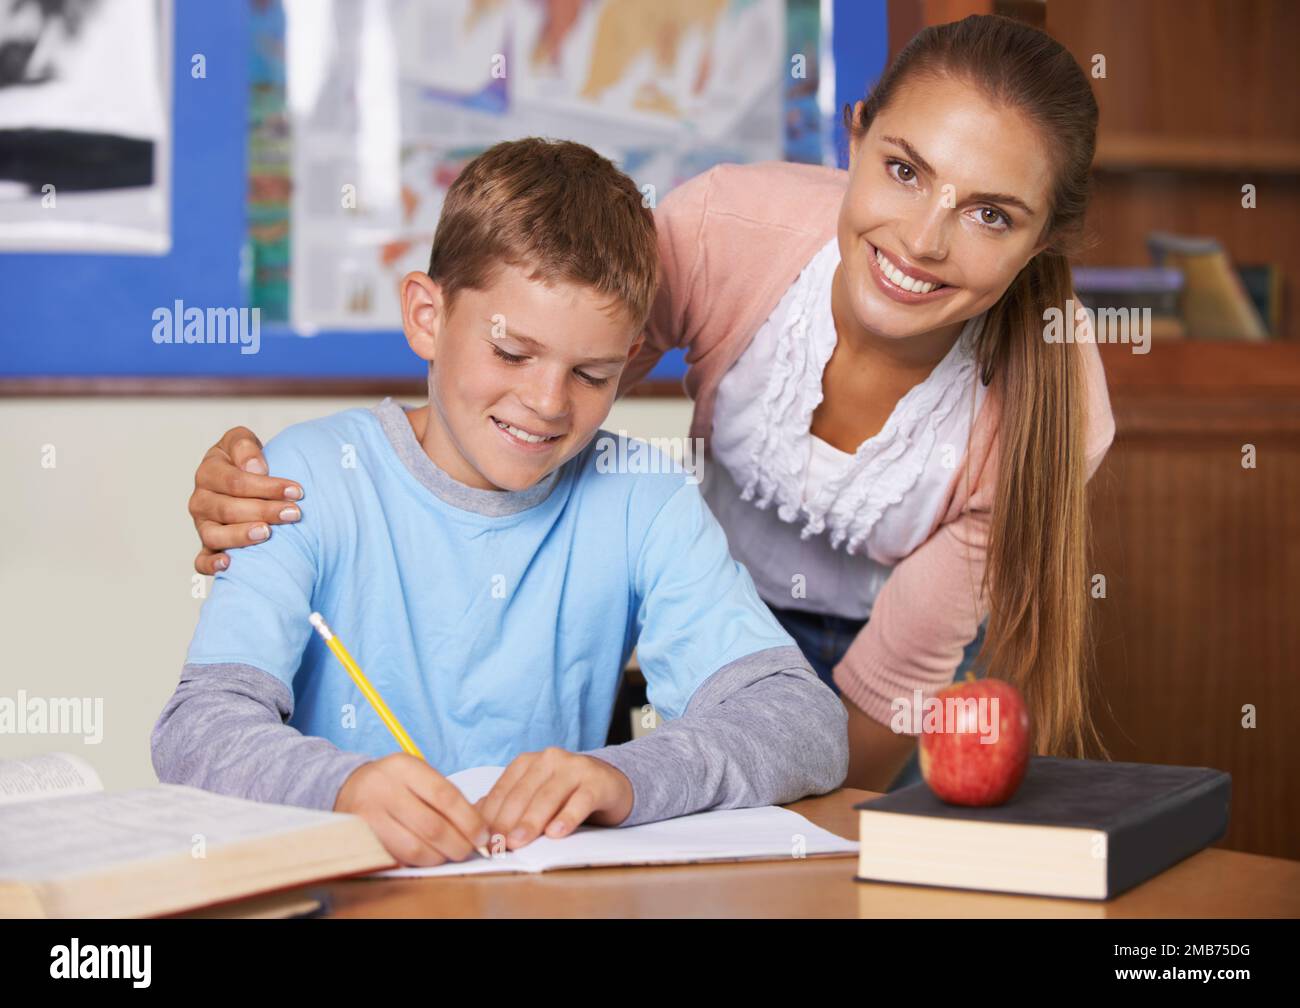 Just a bit of encouragement makes all the difference. A supportive young teacher leaning over her student while he writes in a book - portrait. Stock Photo